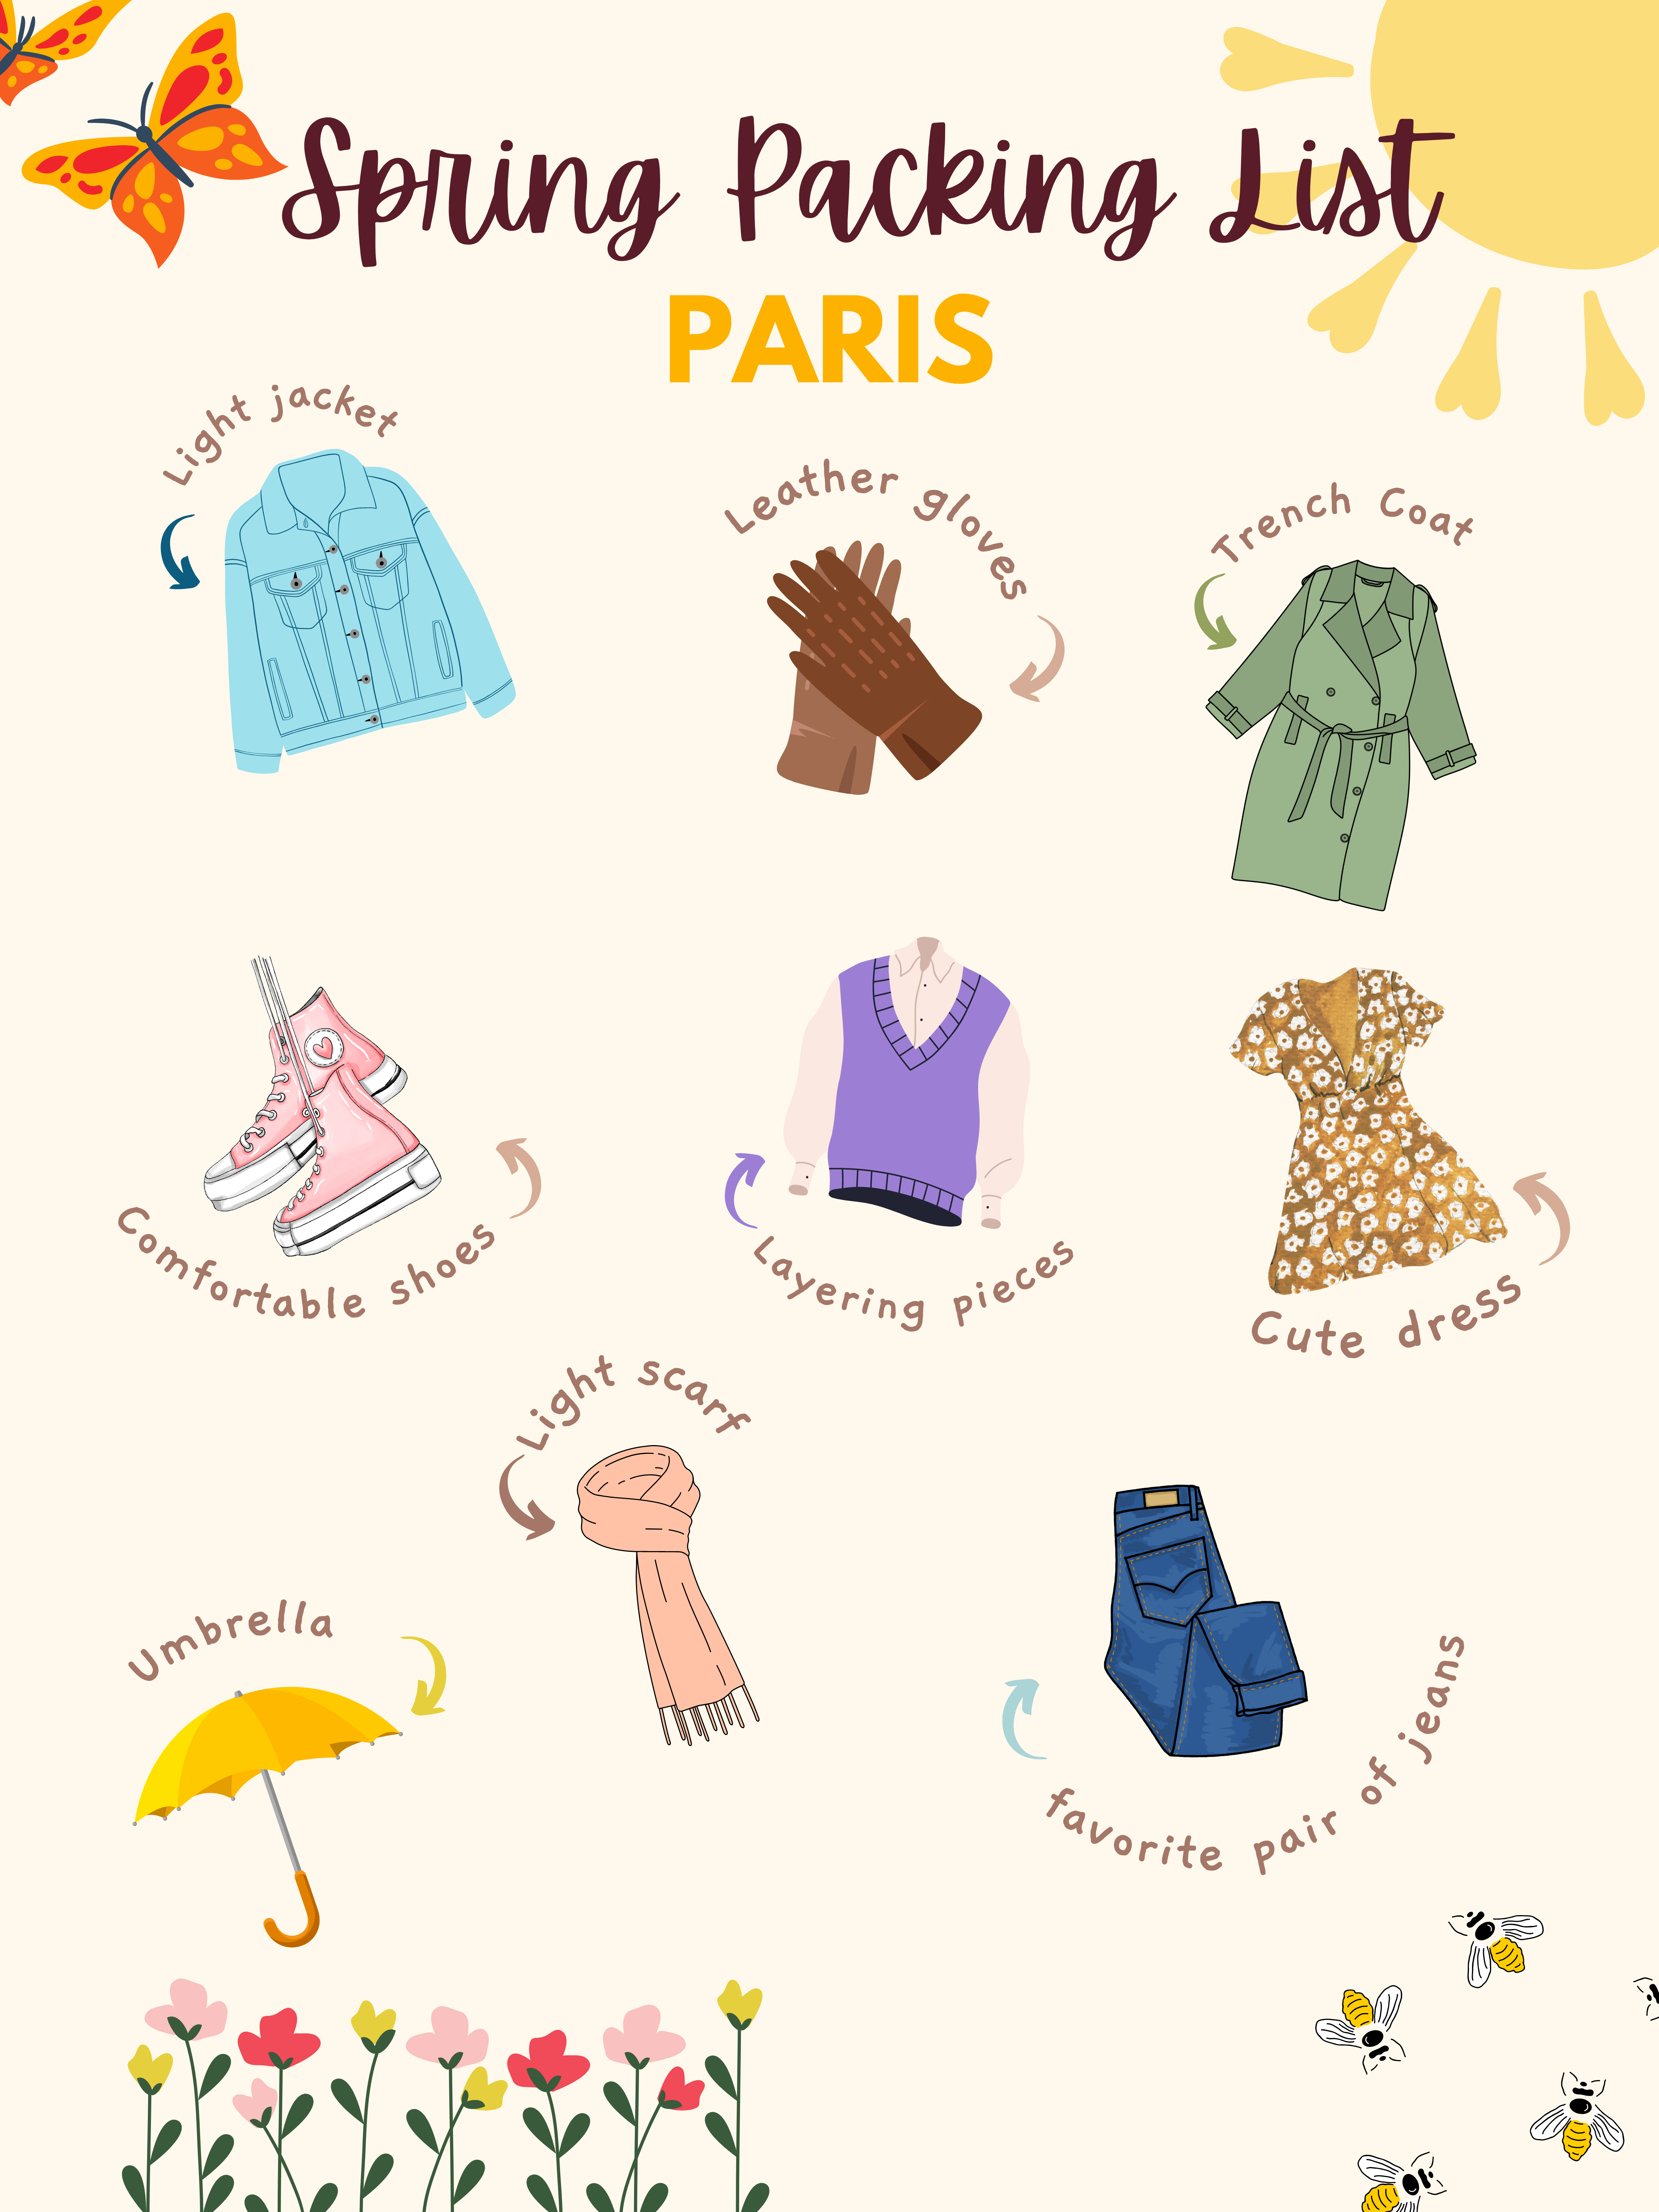 Spring packing list for Paris
Things to do Spring in Paris 